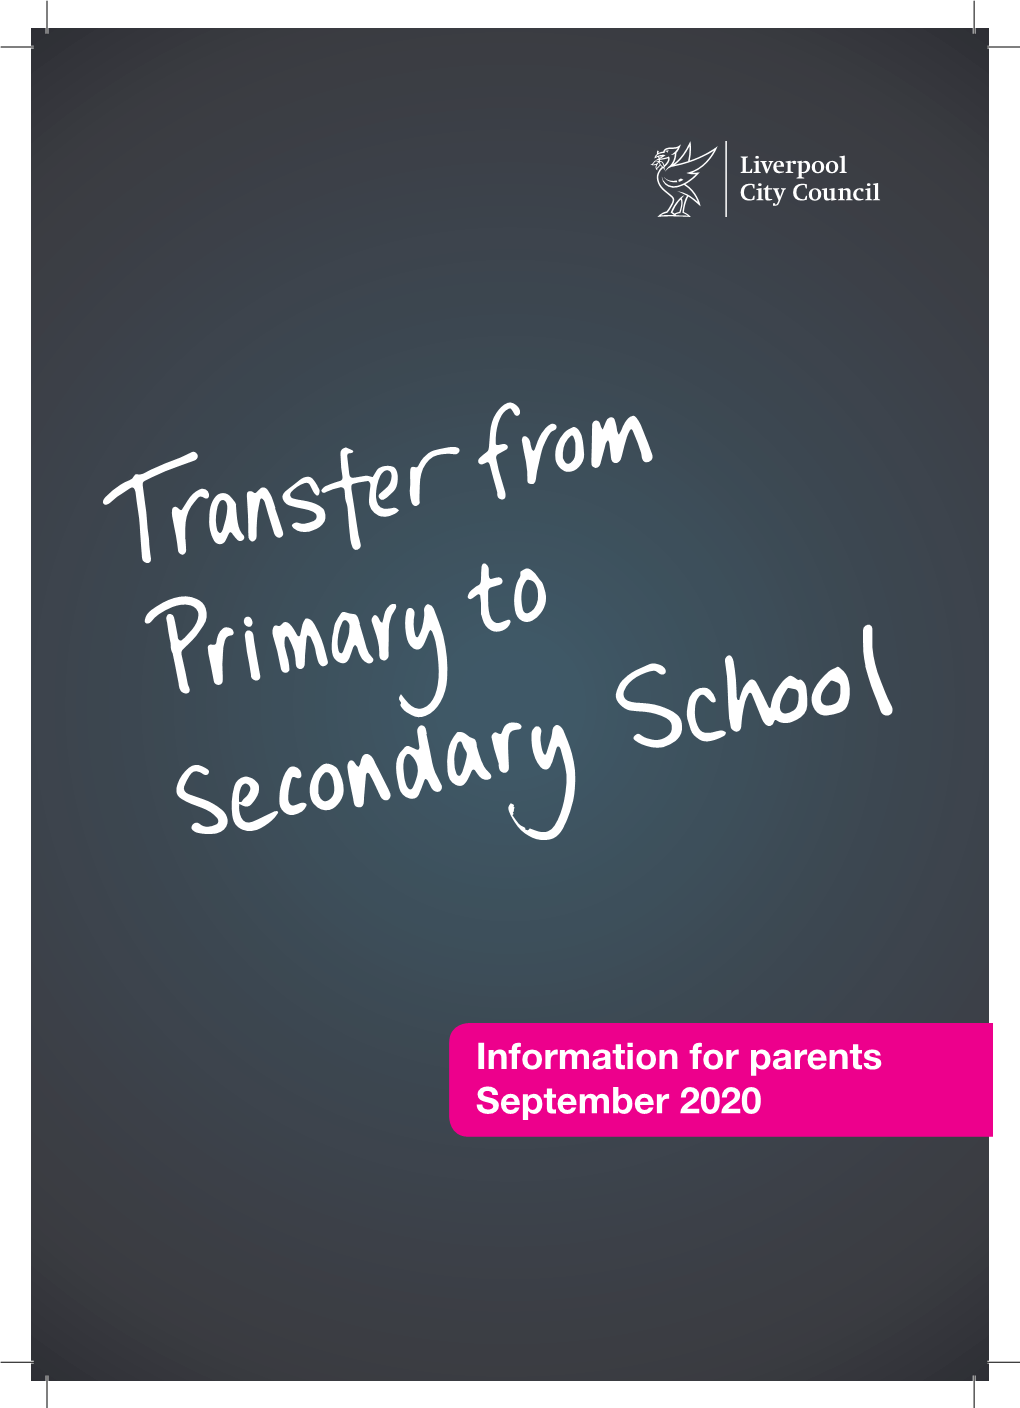 TRANSFER from PRIMARY to SECONDARY School